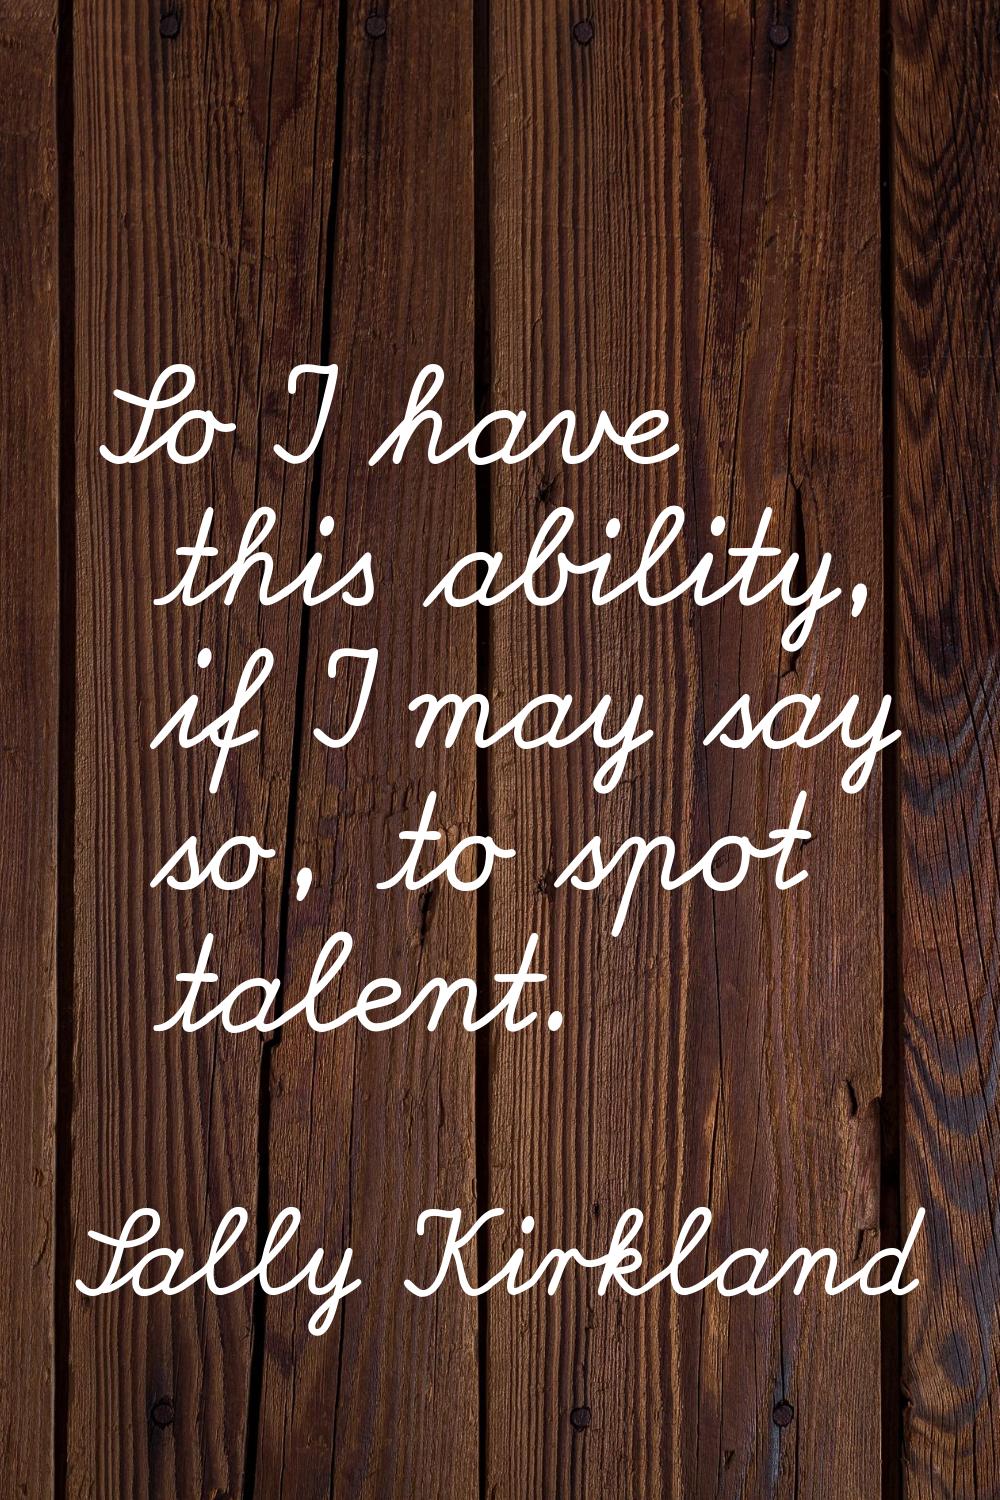 So I have this ability, if I may say so, to spot talent.